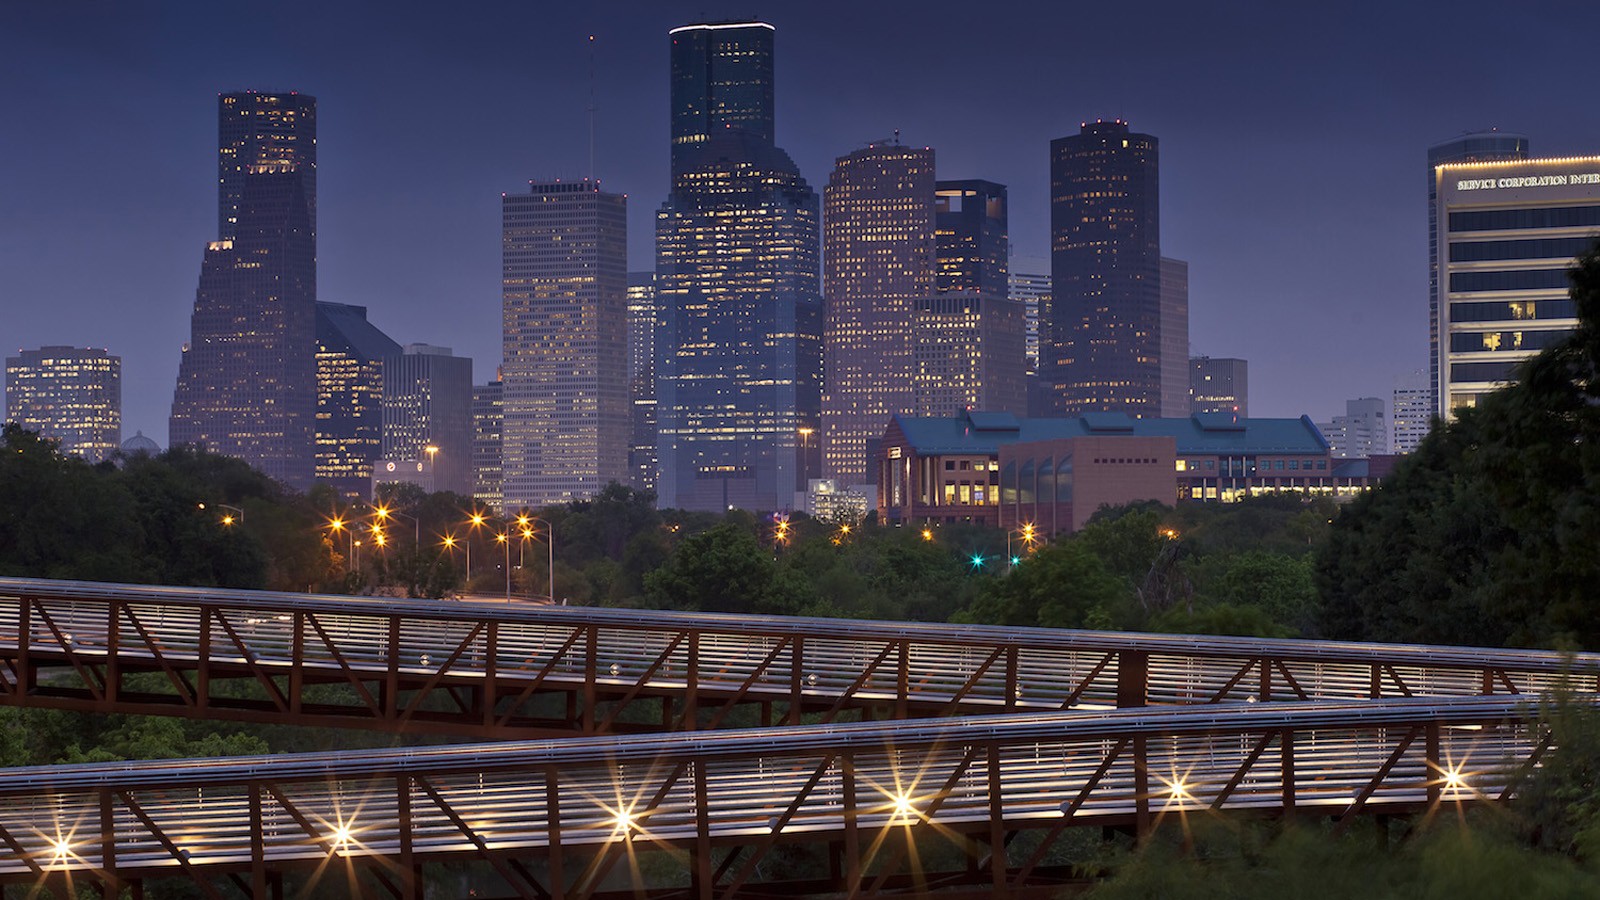 Rosemont Bridge and Trails, by the SWA Group